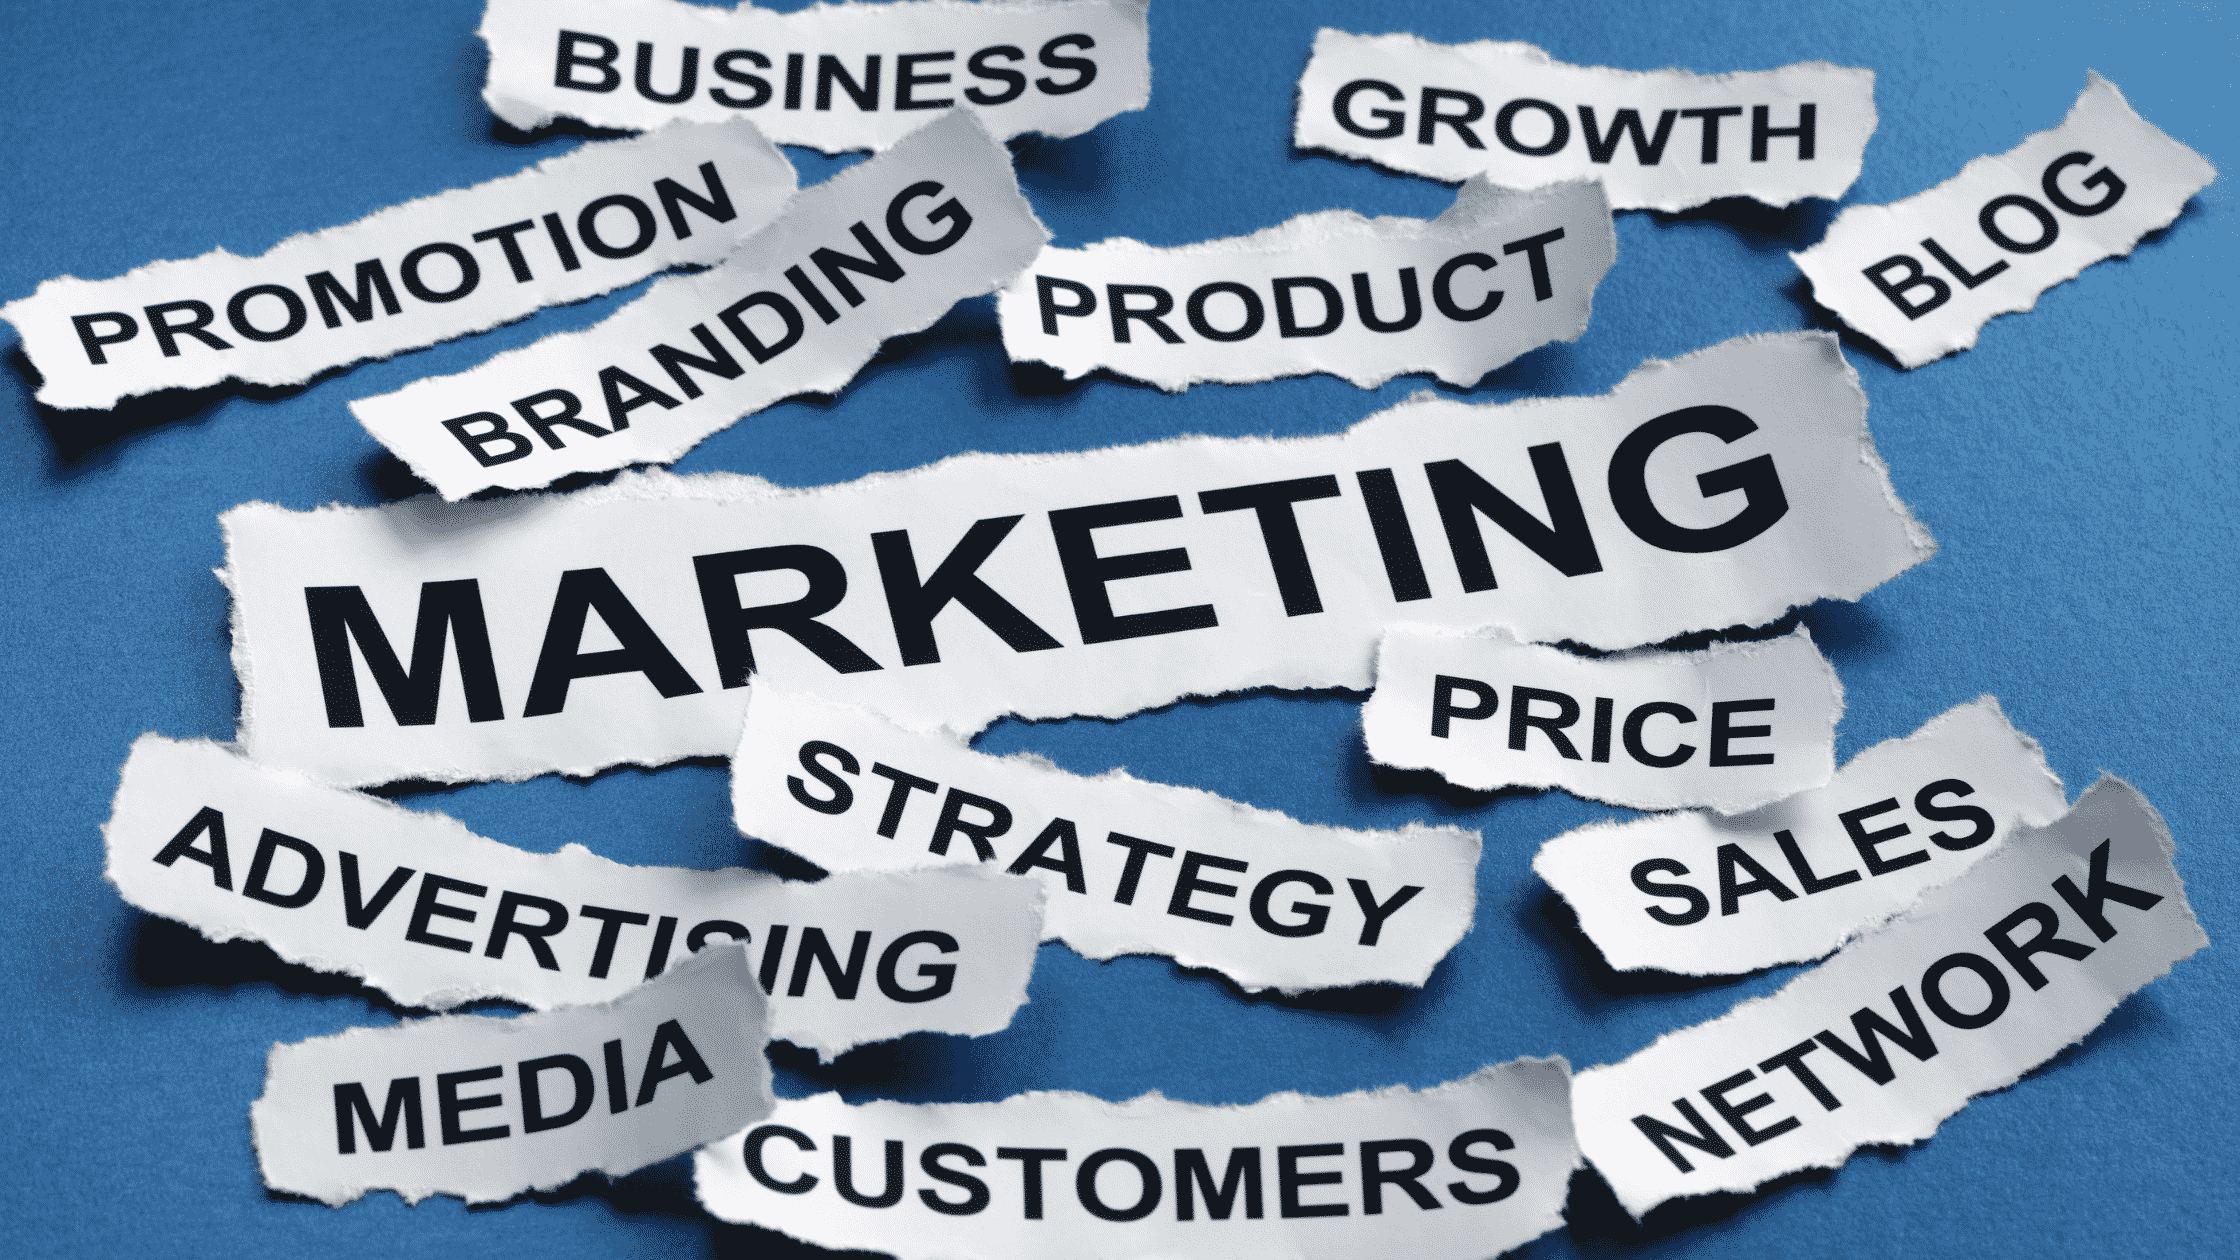 How to Market Your Retail Business Using the 4 Principles of Marketing